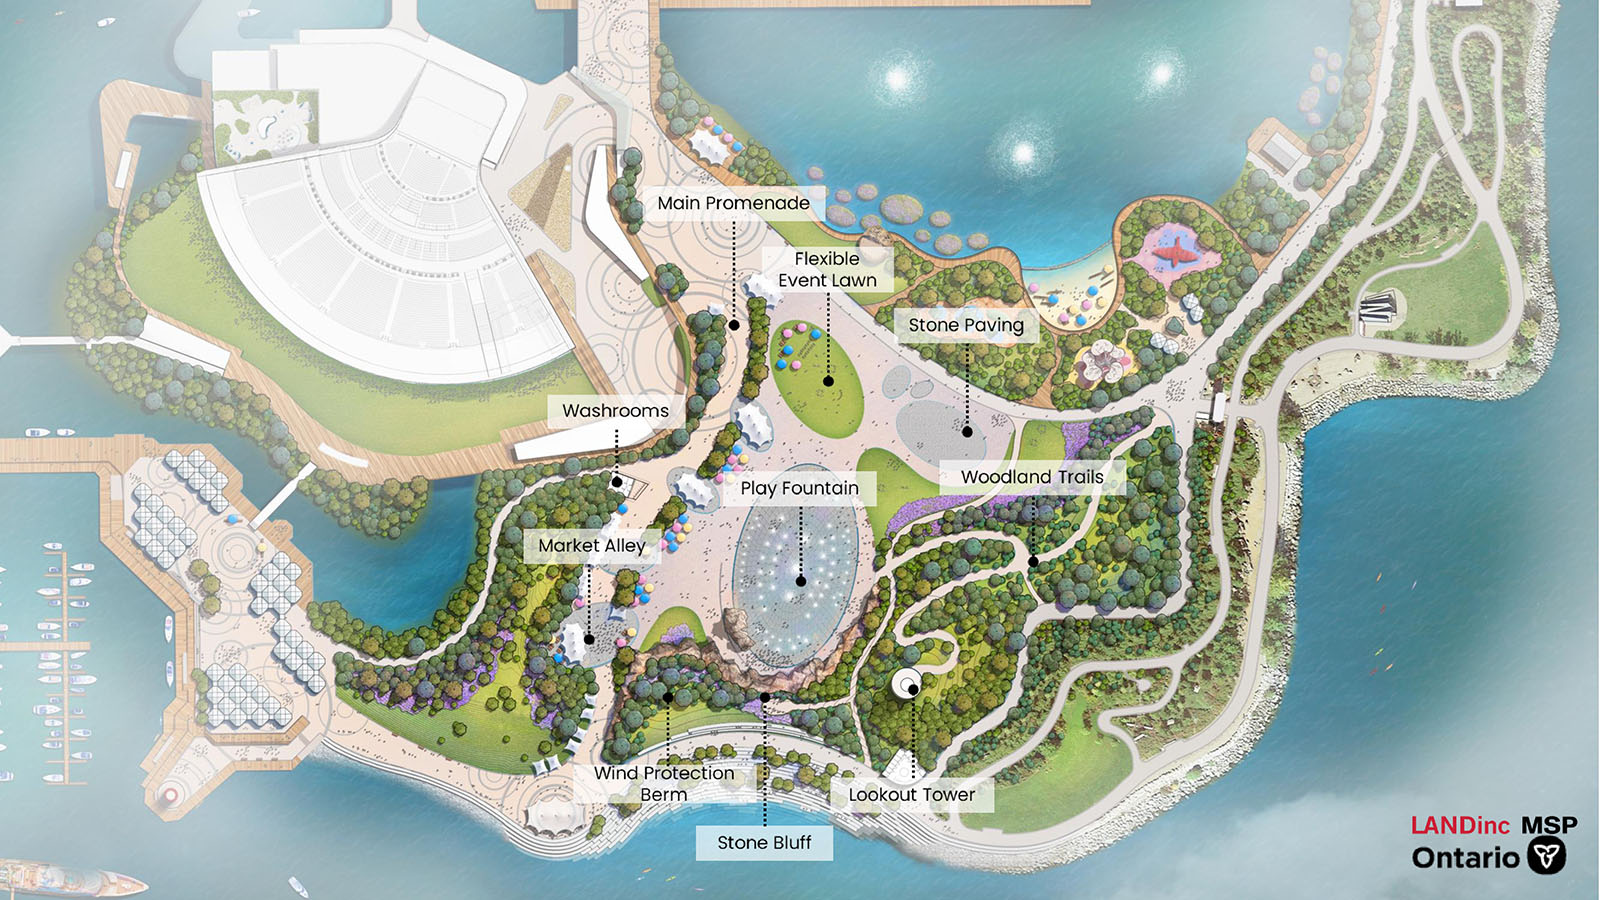 Aerial view rendering of the centre of the east island showing a play fountain, lawn space, a market alley, woodland trails and a stone bluff. 